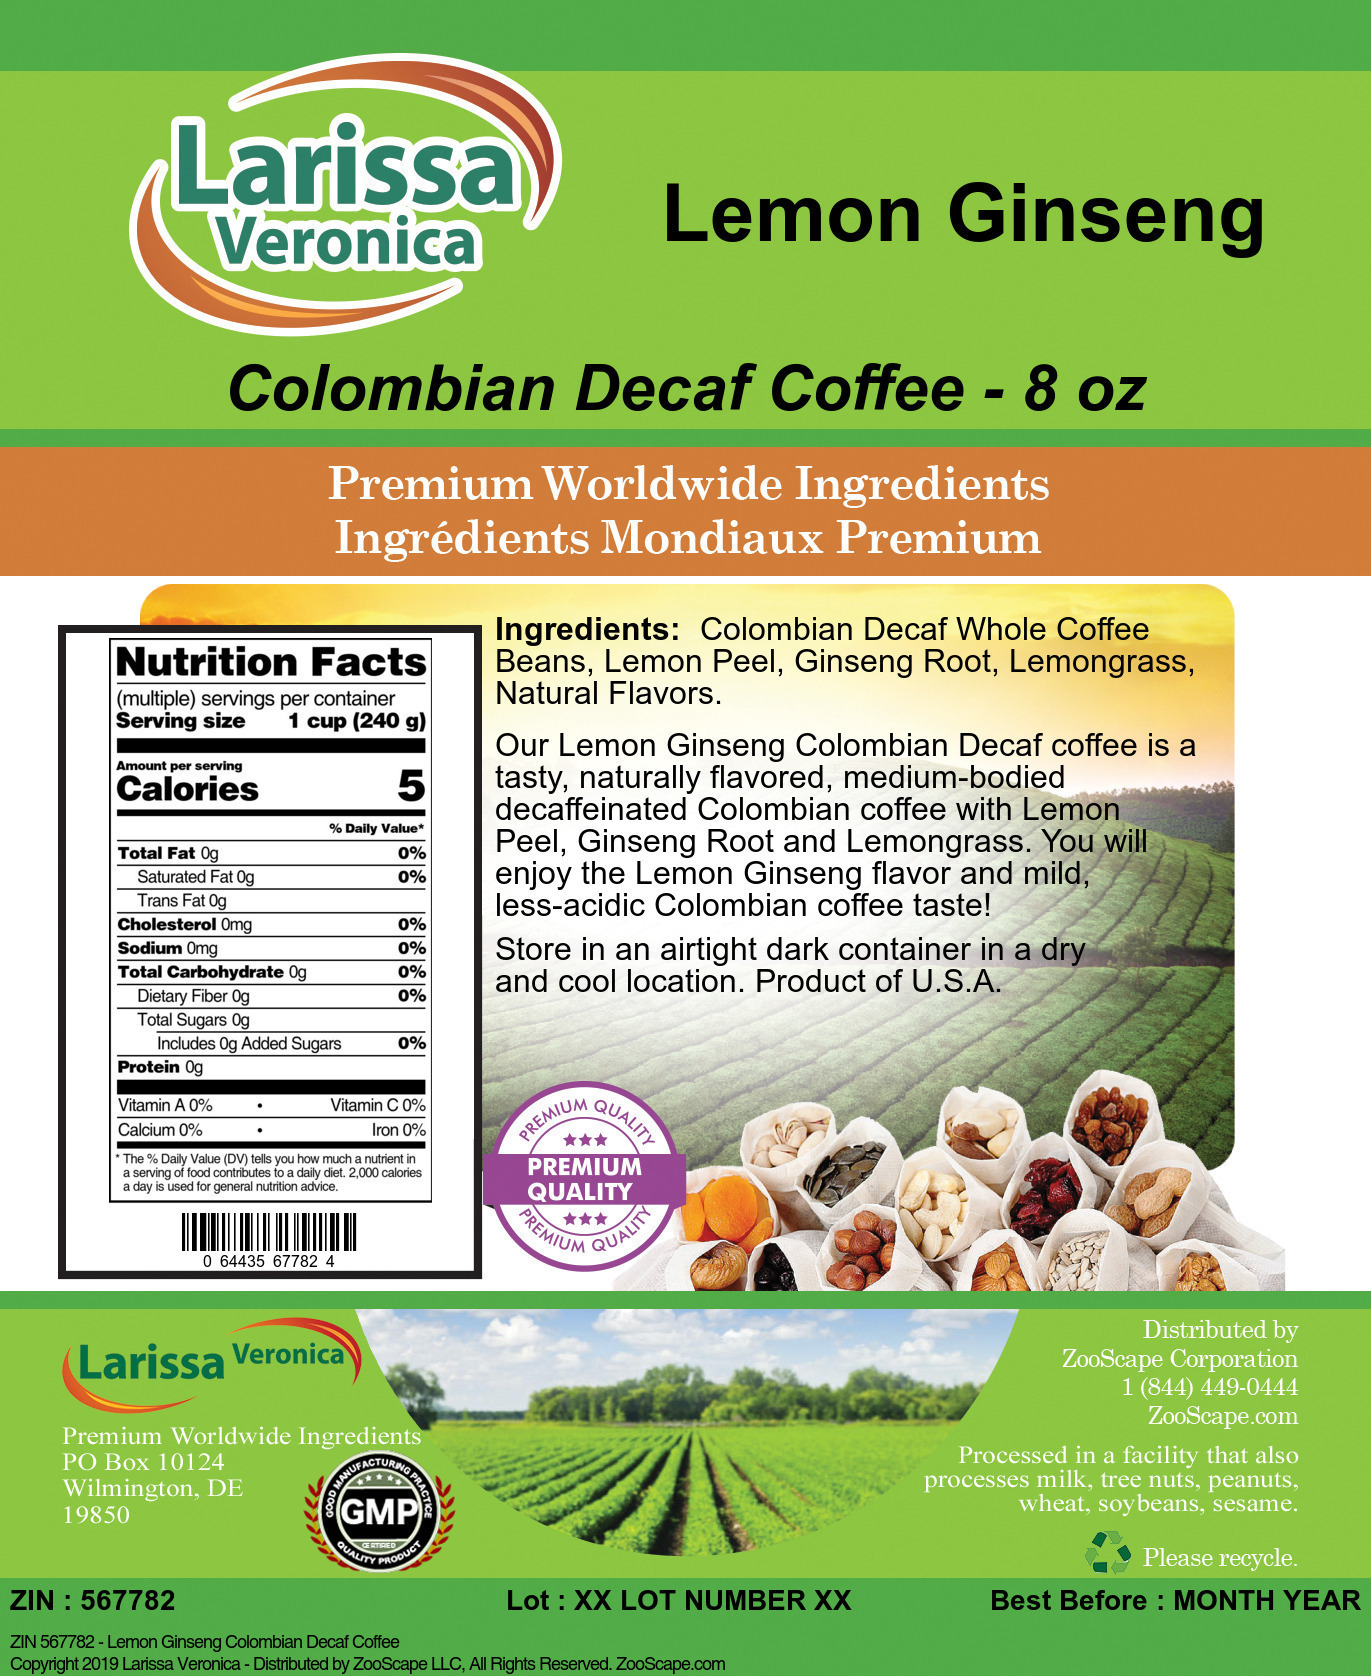 Lemon Ginseng Colombian Decaf Coffee - Label